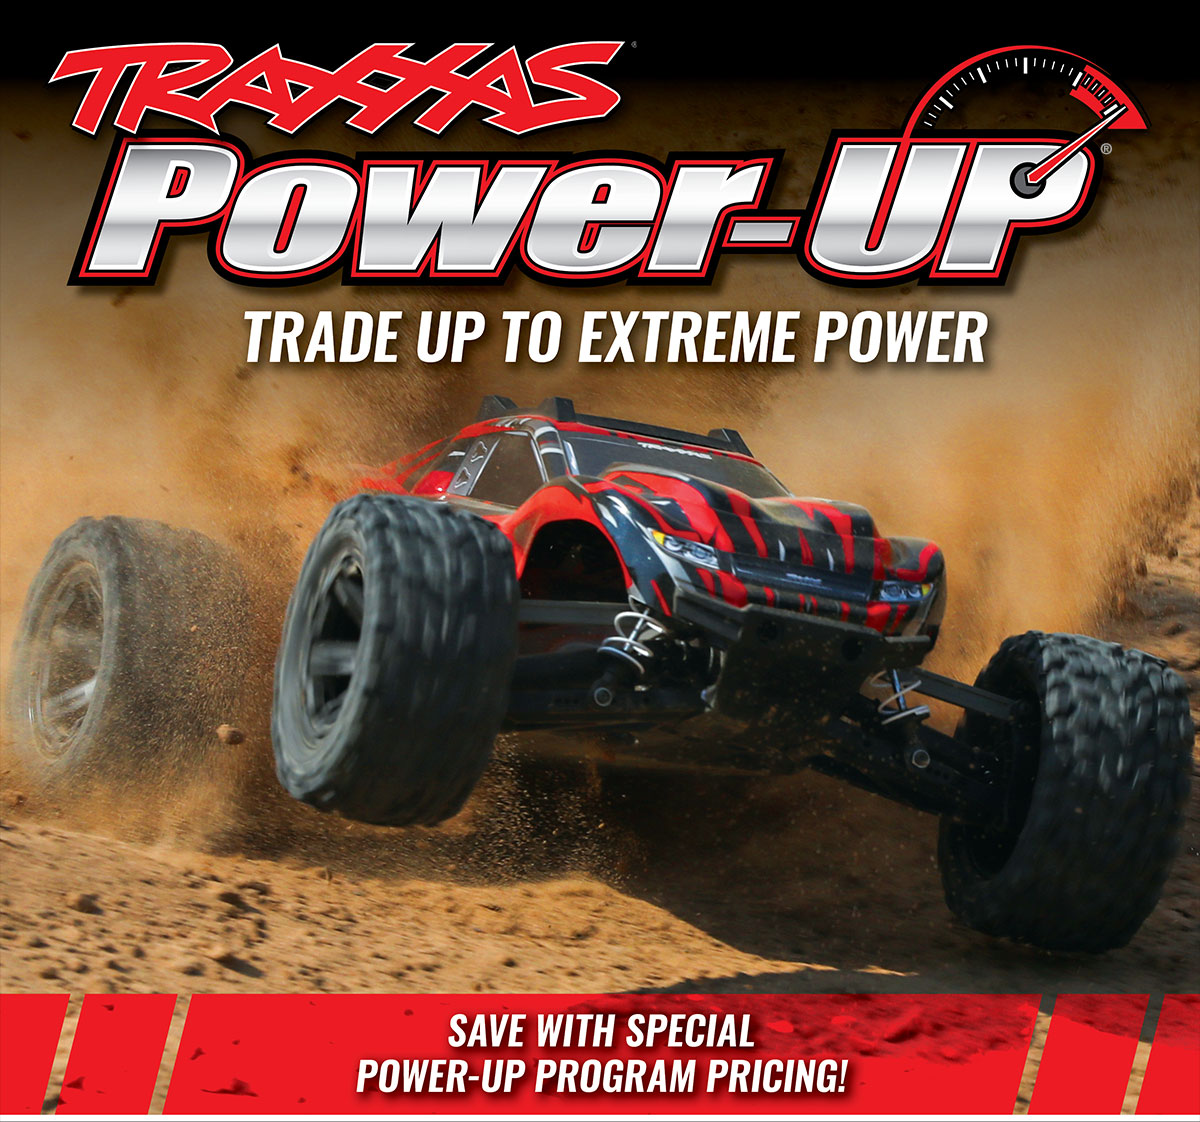 Traxxas Power-Up - Trade up to EXTREME POWER and Save with Special Power-Up Program Pricing!